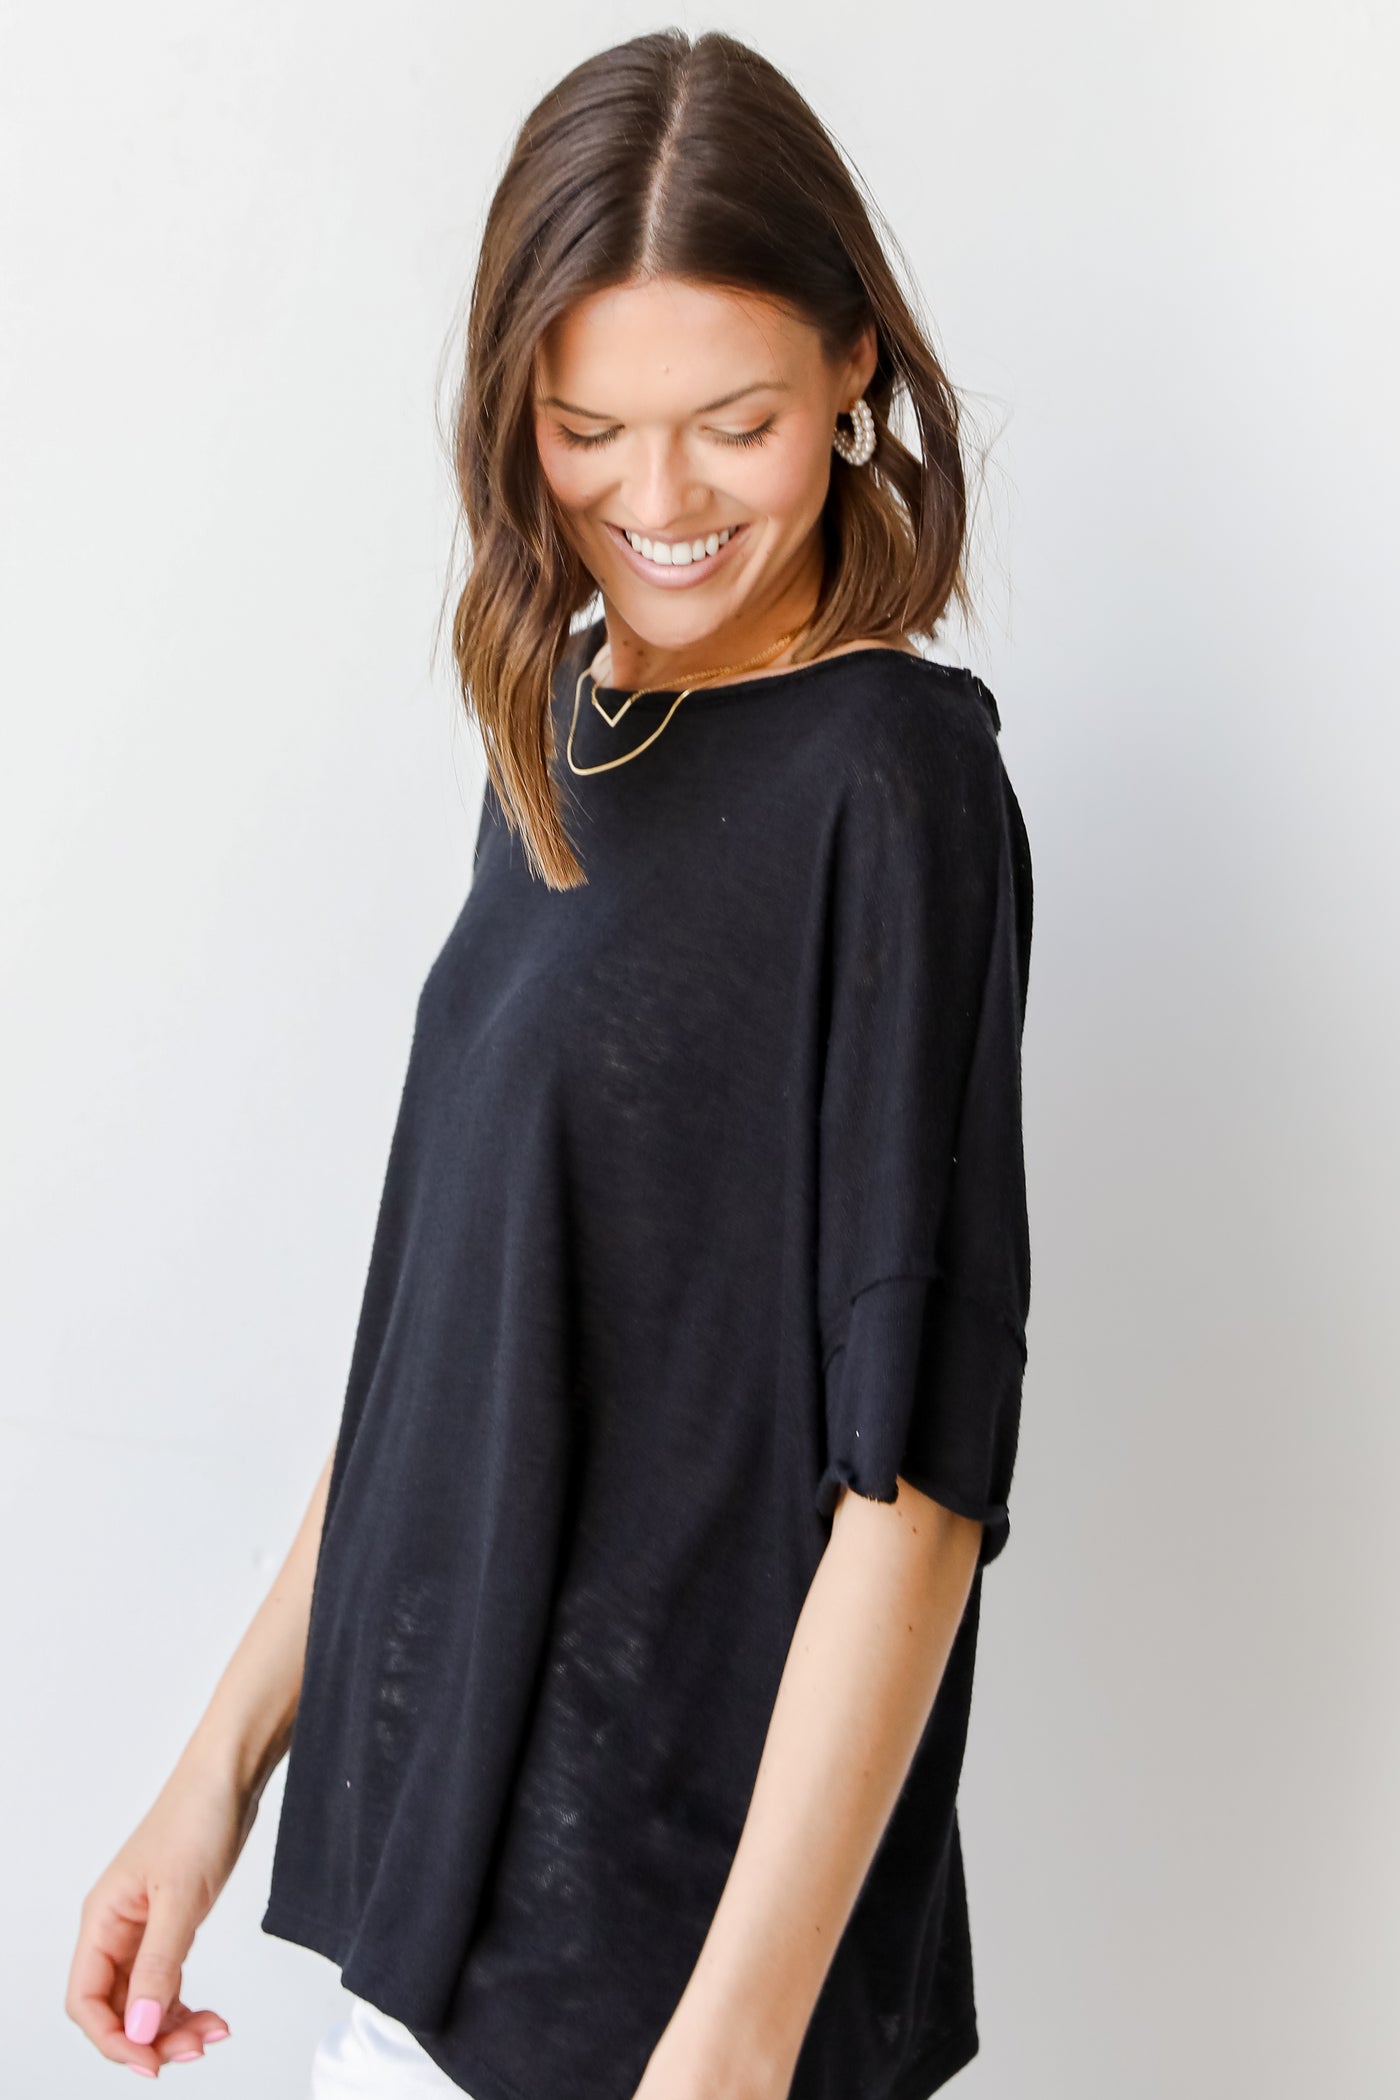 Knit Round Neck Tee in black side view